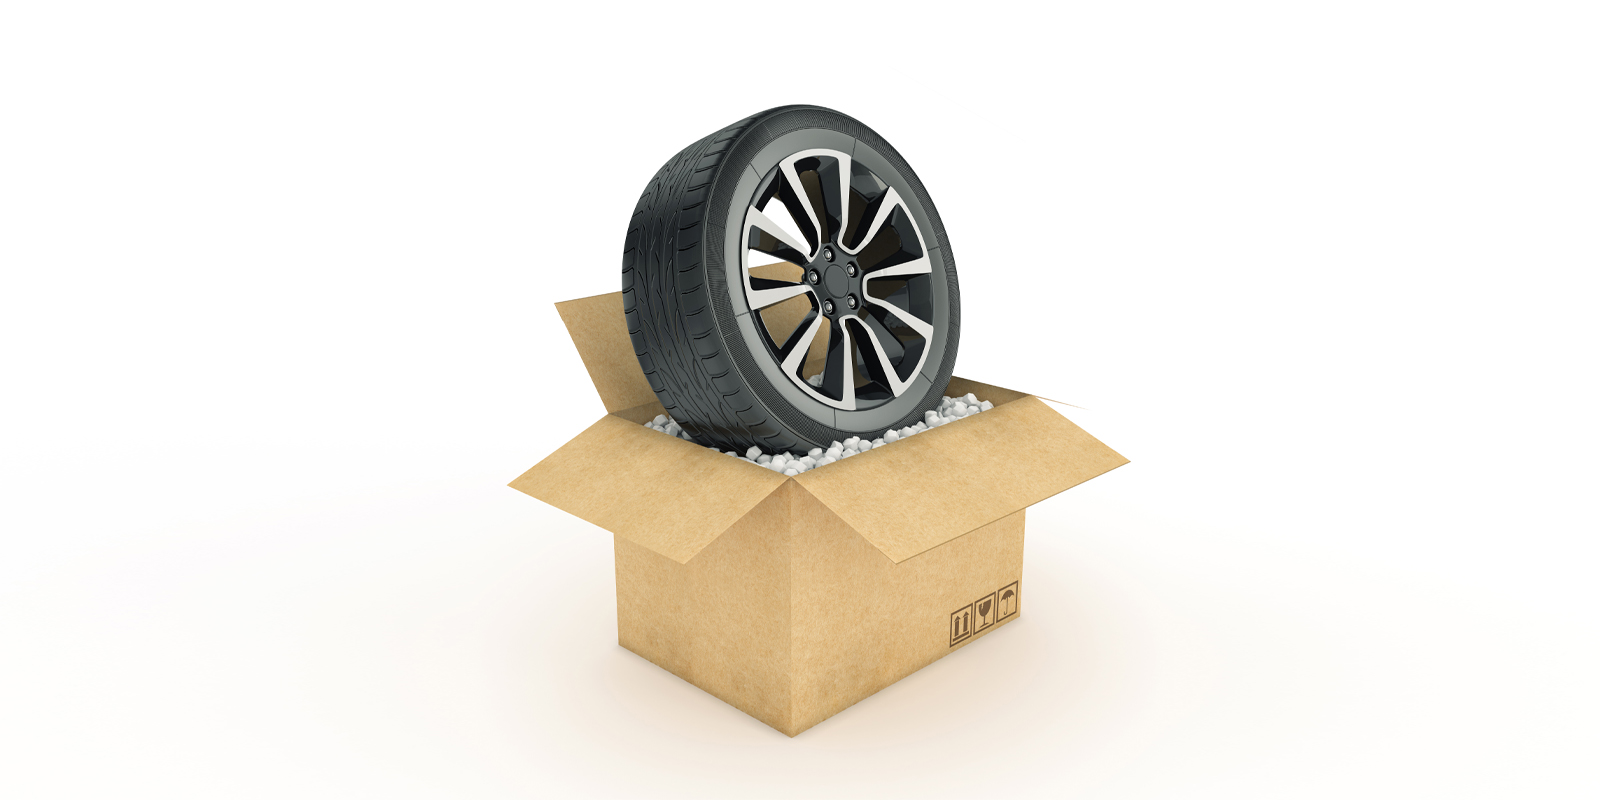 Carton for rims in Melbourne - Print with Pagerr